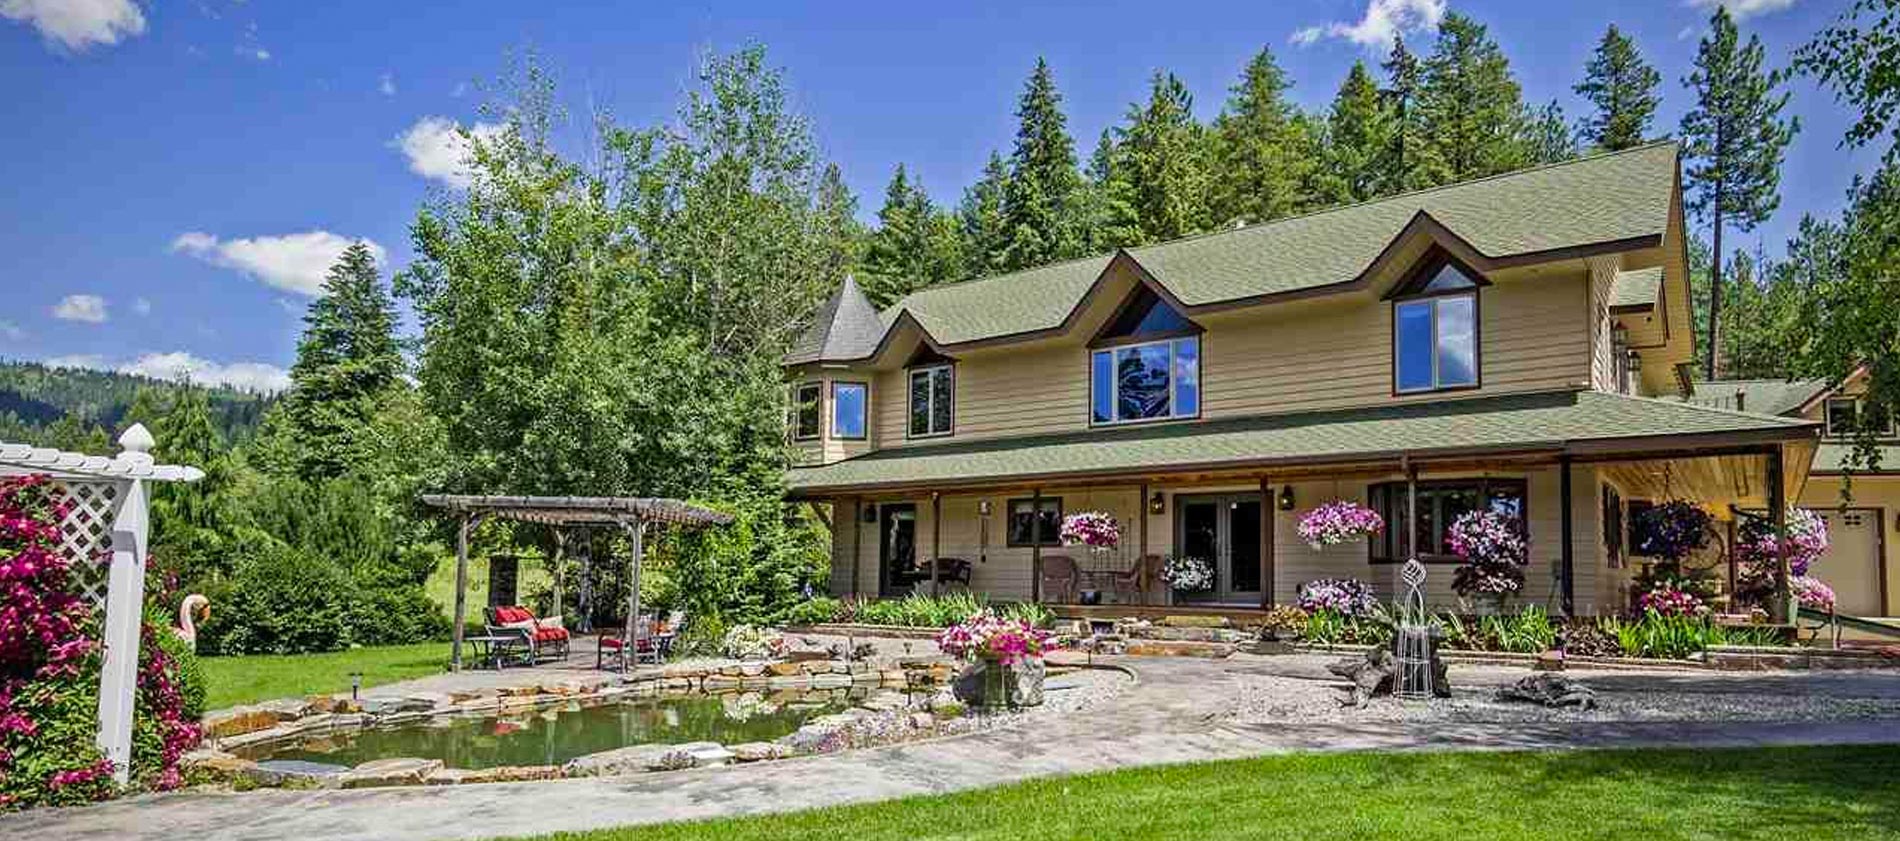 Escape to North Idaho paradise and live the dream at Flying W Ranch